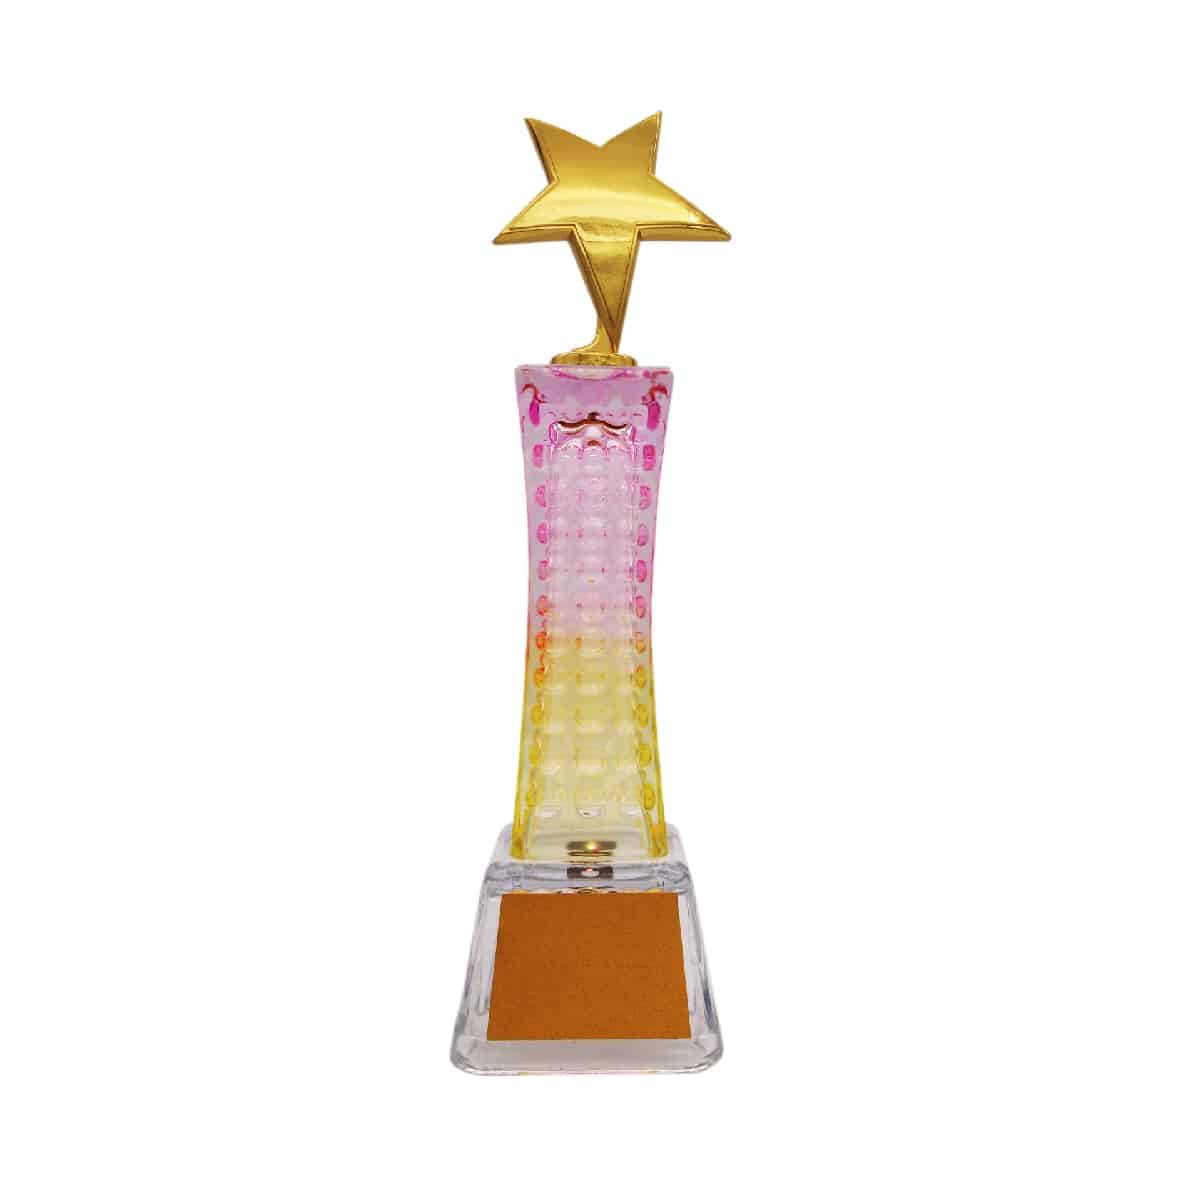 LED Trophy at Clazz Trophy Malaysia | #1 Rated Trophy Supplier in Malaysia